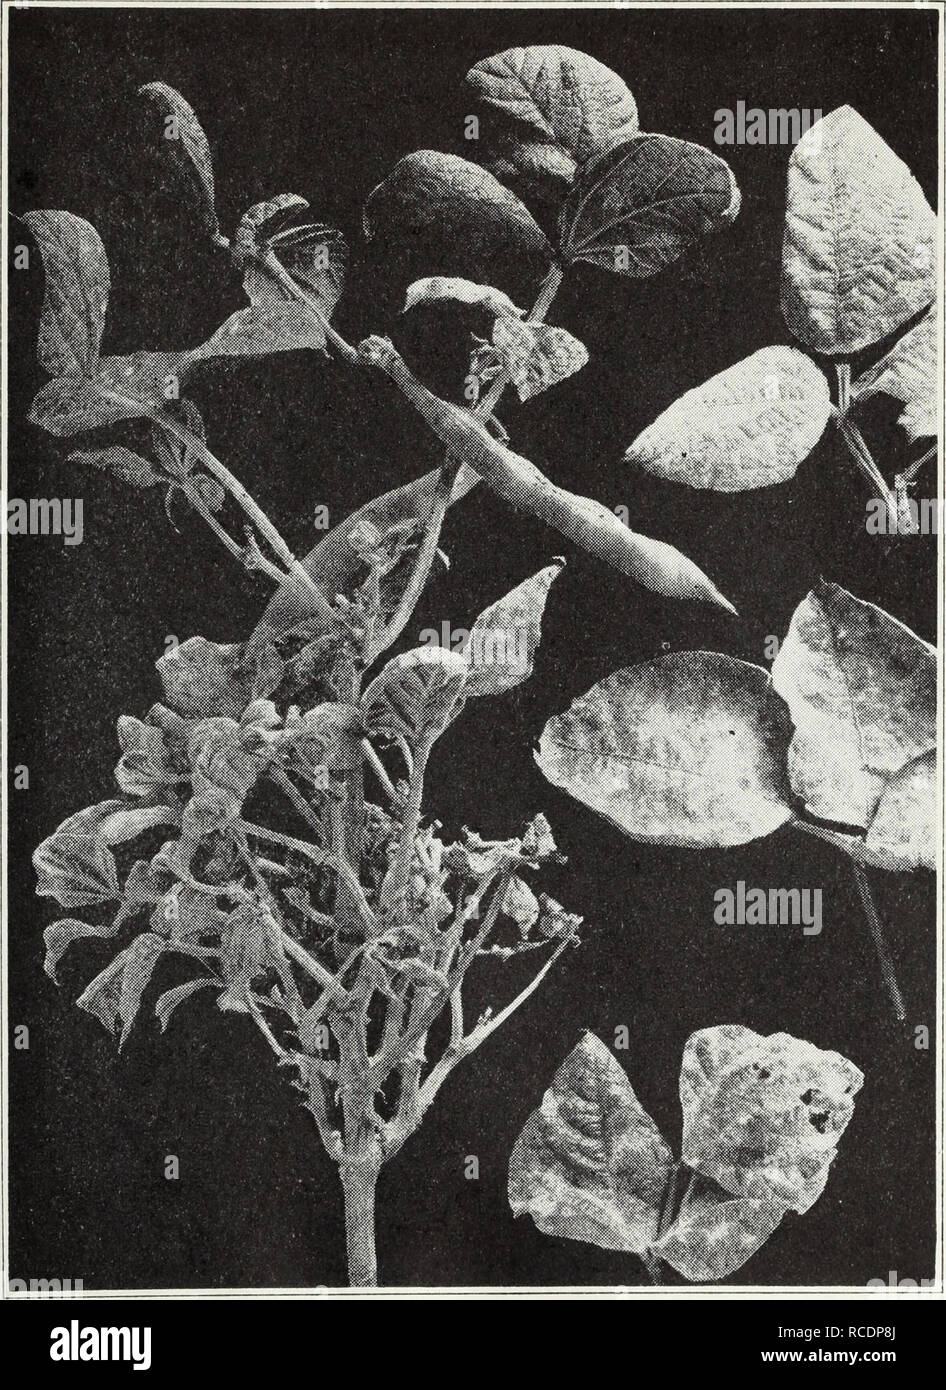 . Diseases of field crops. Plant diseases. 24 California Agricultural Extension Service [Cir. 121 of this type. Resistant varieties of different types of beans may in time be developed but none are available at present. Mosaic.—The leaves of plants attacked by this virus disease are much. Fig. 16.—Powdery mildew of beans. (From Ext. Cir. 119.) puckered and cupped downward at the edges. In color they are darker green than normal or mottled with green and yellow patches (fi&lt;r. 15). Early-affected plants bear little seed. The infection is carried in the seed and spread by aphids.. Please note  Stock Photo